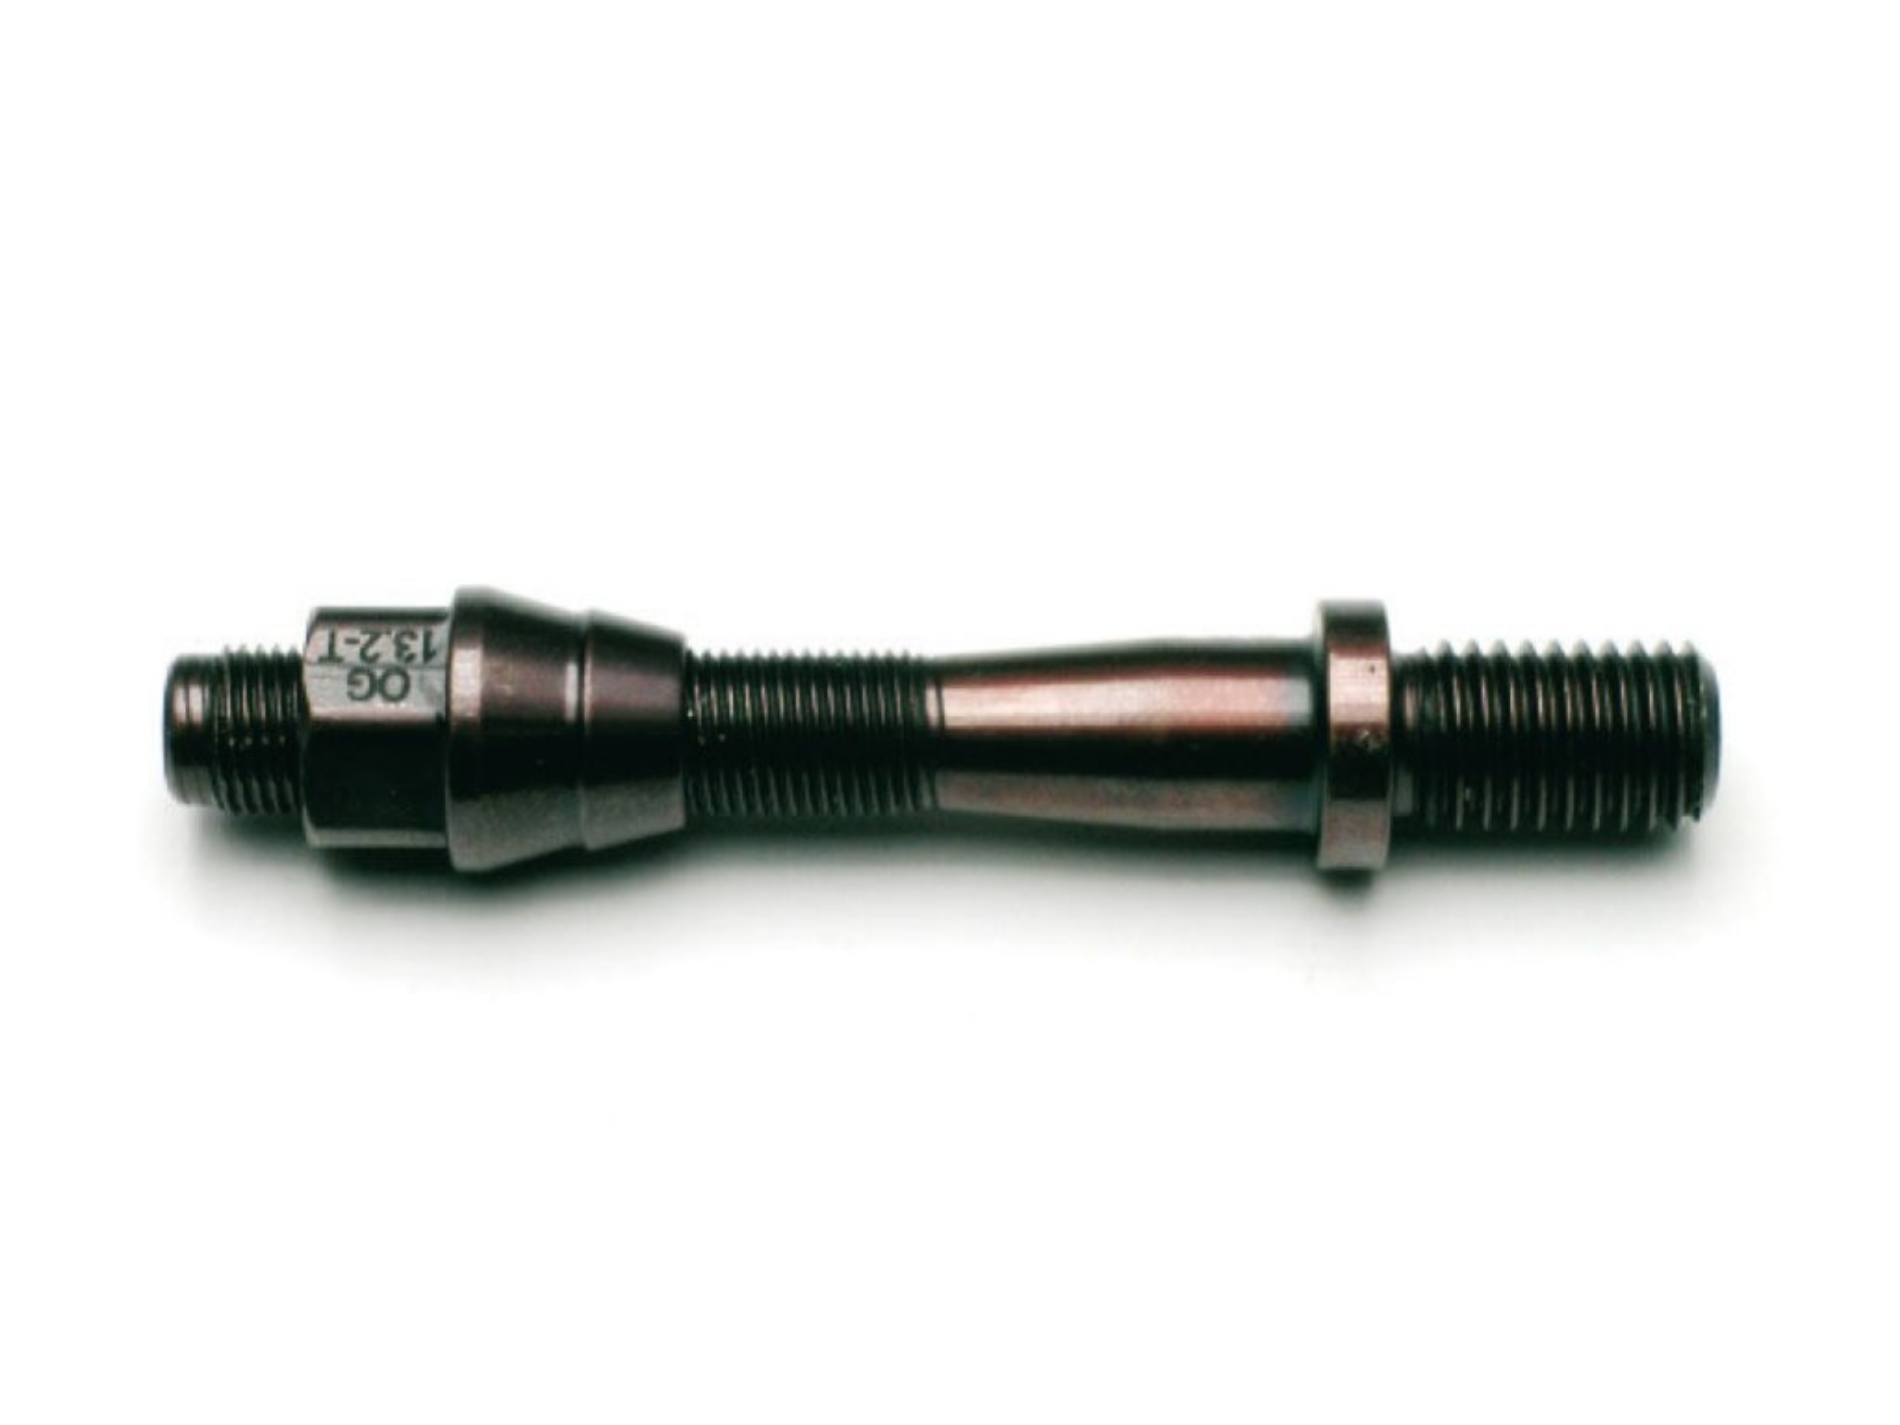 Picture of Cembre Two Piece Plunger (M12) OG13.2T